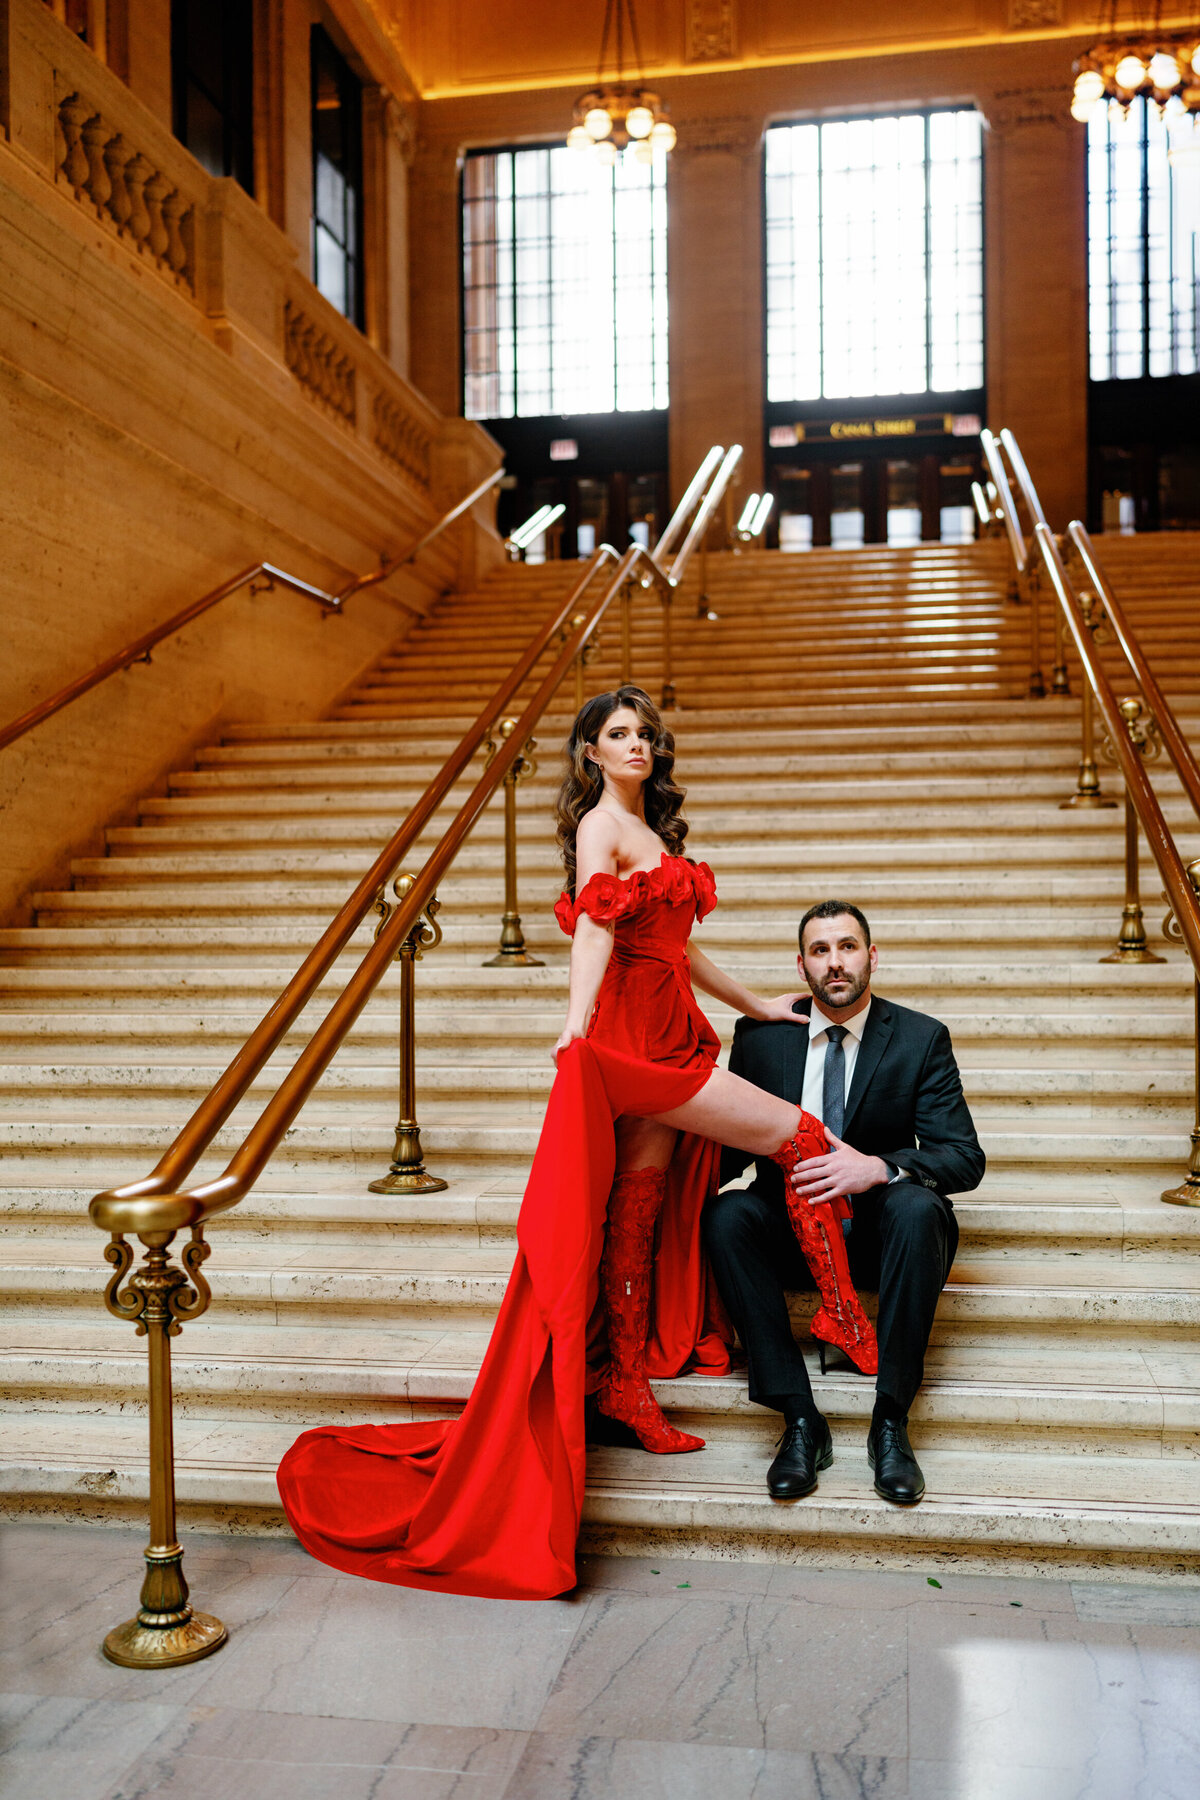 Aspen-Avenue-Chicago-Wedding-Photographer-Union-Station-Chicago-Theater-Engagement-Session-Timeless-Romantic-Red-Dress-Editorial-Stemming-From-Love-Bry-Jean-Artistry-The-Bridal-Collective-True-to-color-Luxury-FAV-19